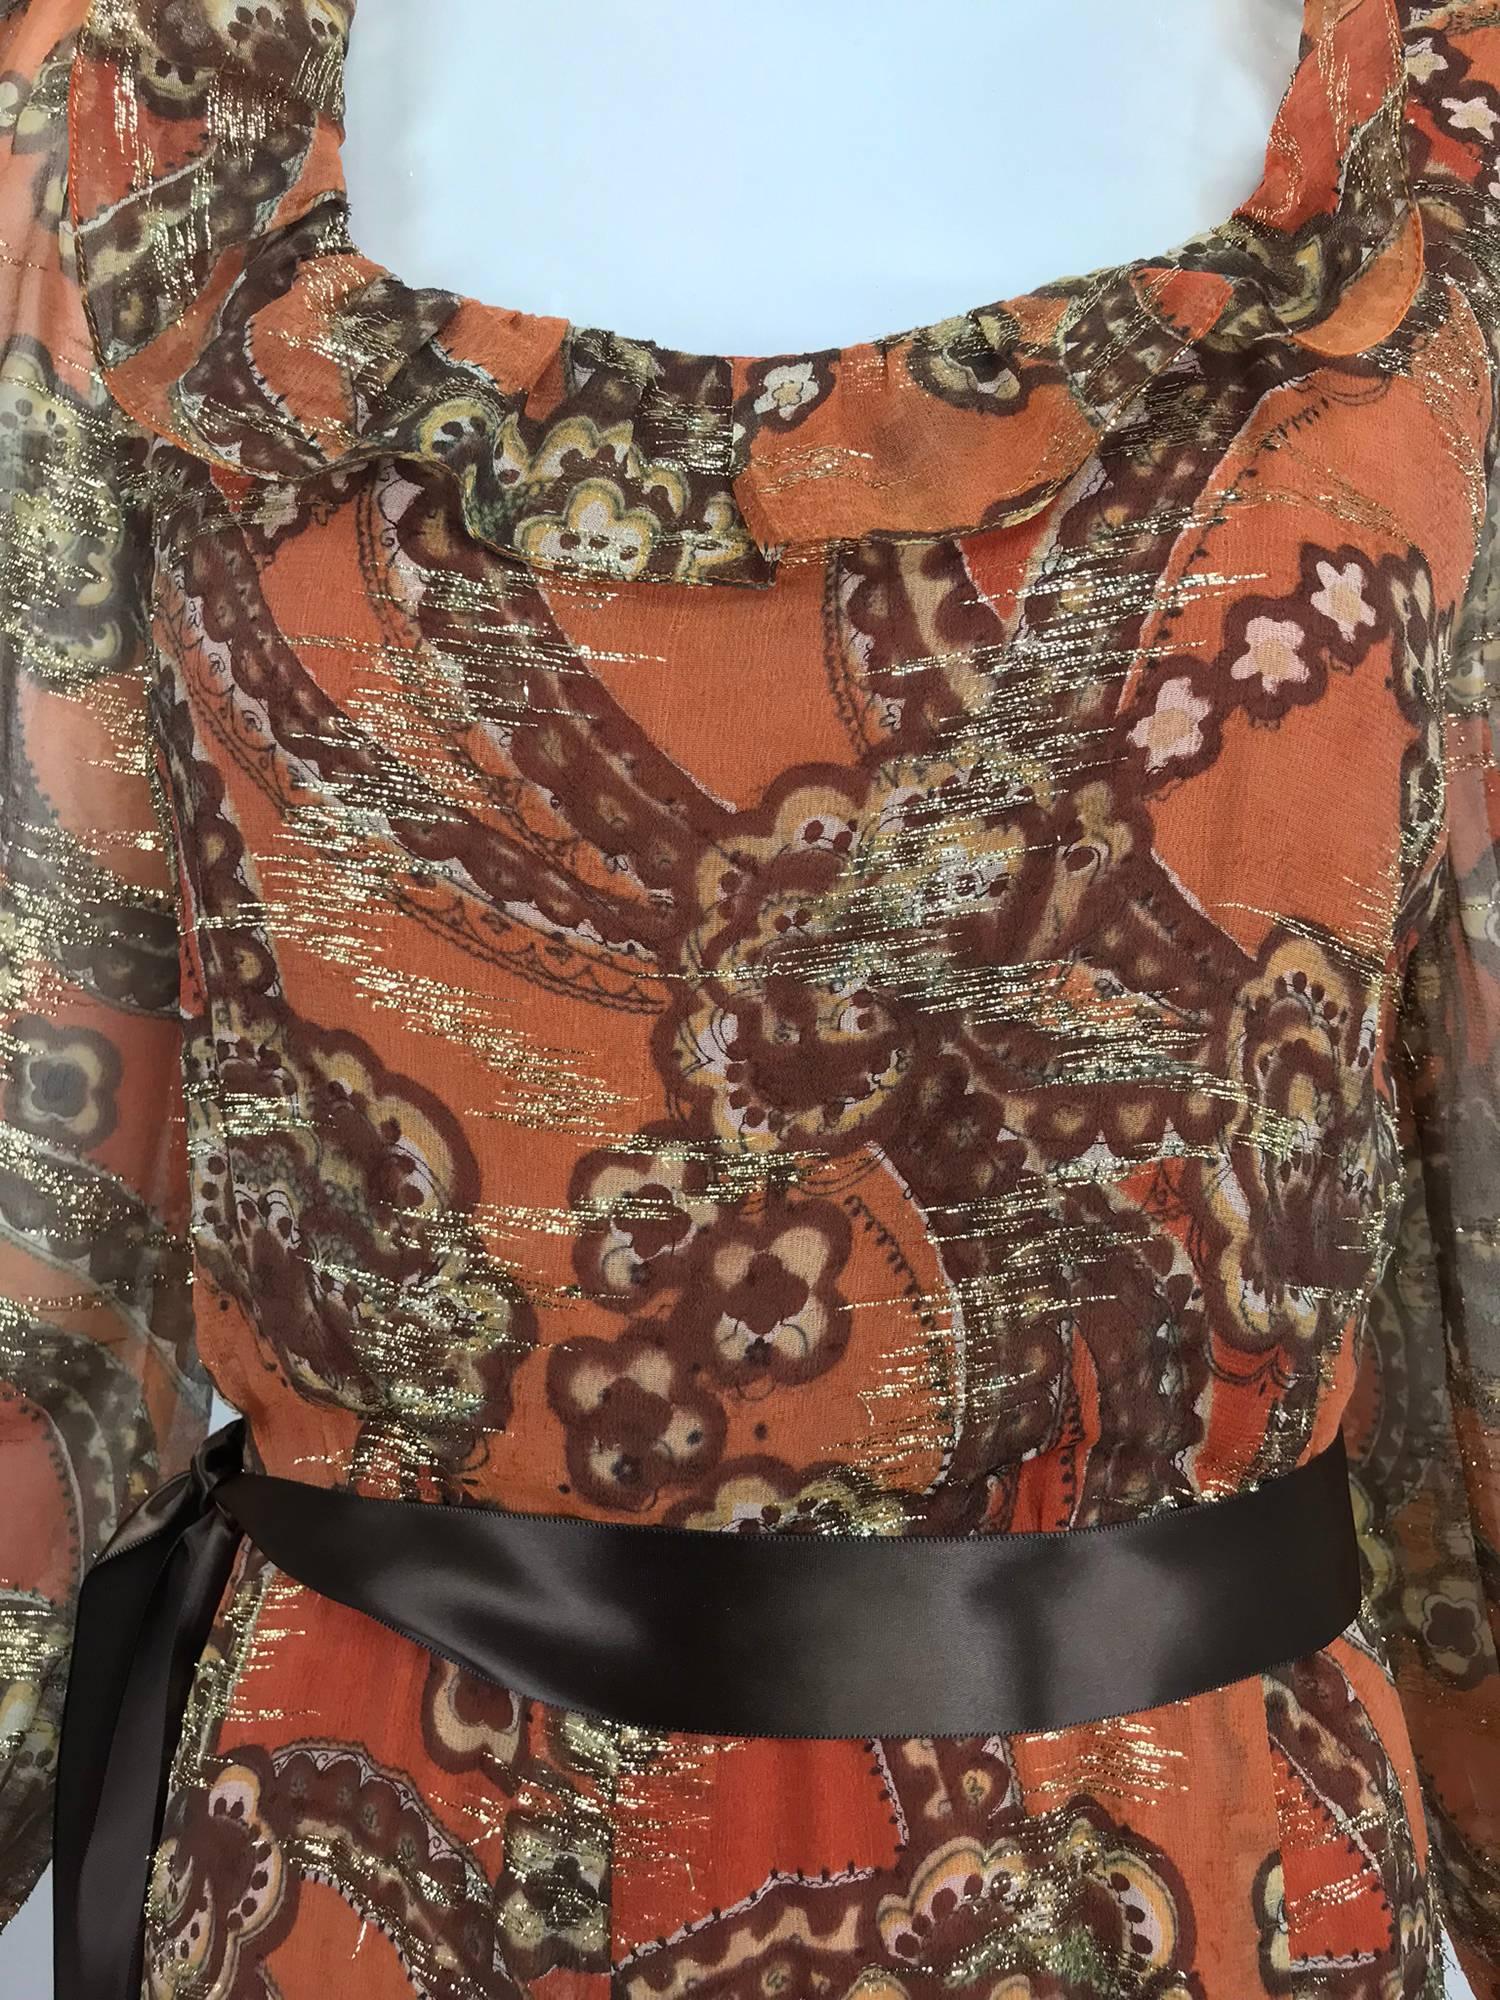 Oscar de la Renta russet print silk chiffon woven metallic brocade maxi dress from the 1970s. Swirling ribbons and flowers in brown and cream with a bold background of light and dark russet and throughout sparkling gold metallic thread, better to